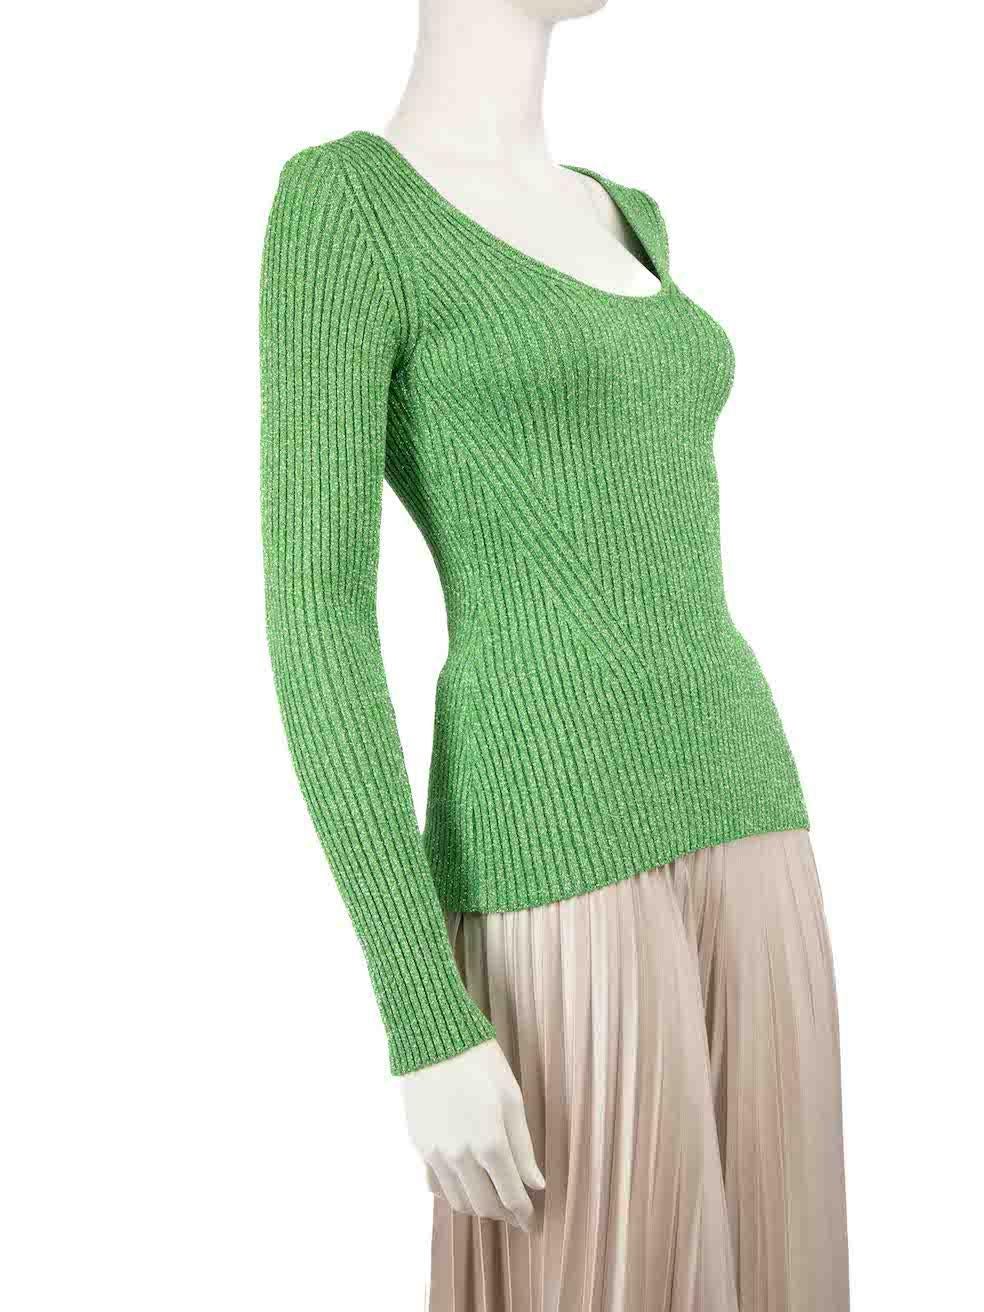 CONDITION is Very good. Hardly any visible wear to top is evident on this used Ganni designer resale item.
 
 
 
 Details
 
 
 Green
 
 Viscose
 
 Knit jumper
 
 Metallic thread
 
 Round neck
 
 Stretchy
 
 Long sleeves
 
 
 
 
 
 Made in Italy
 
 
